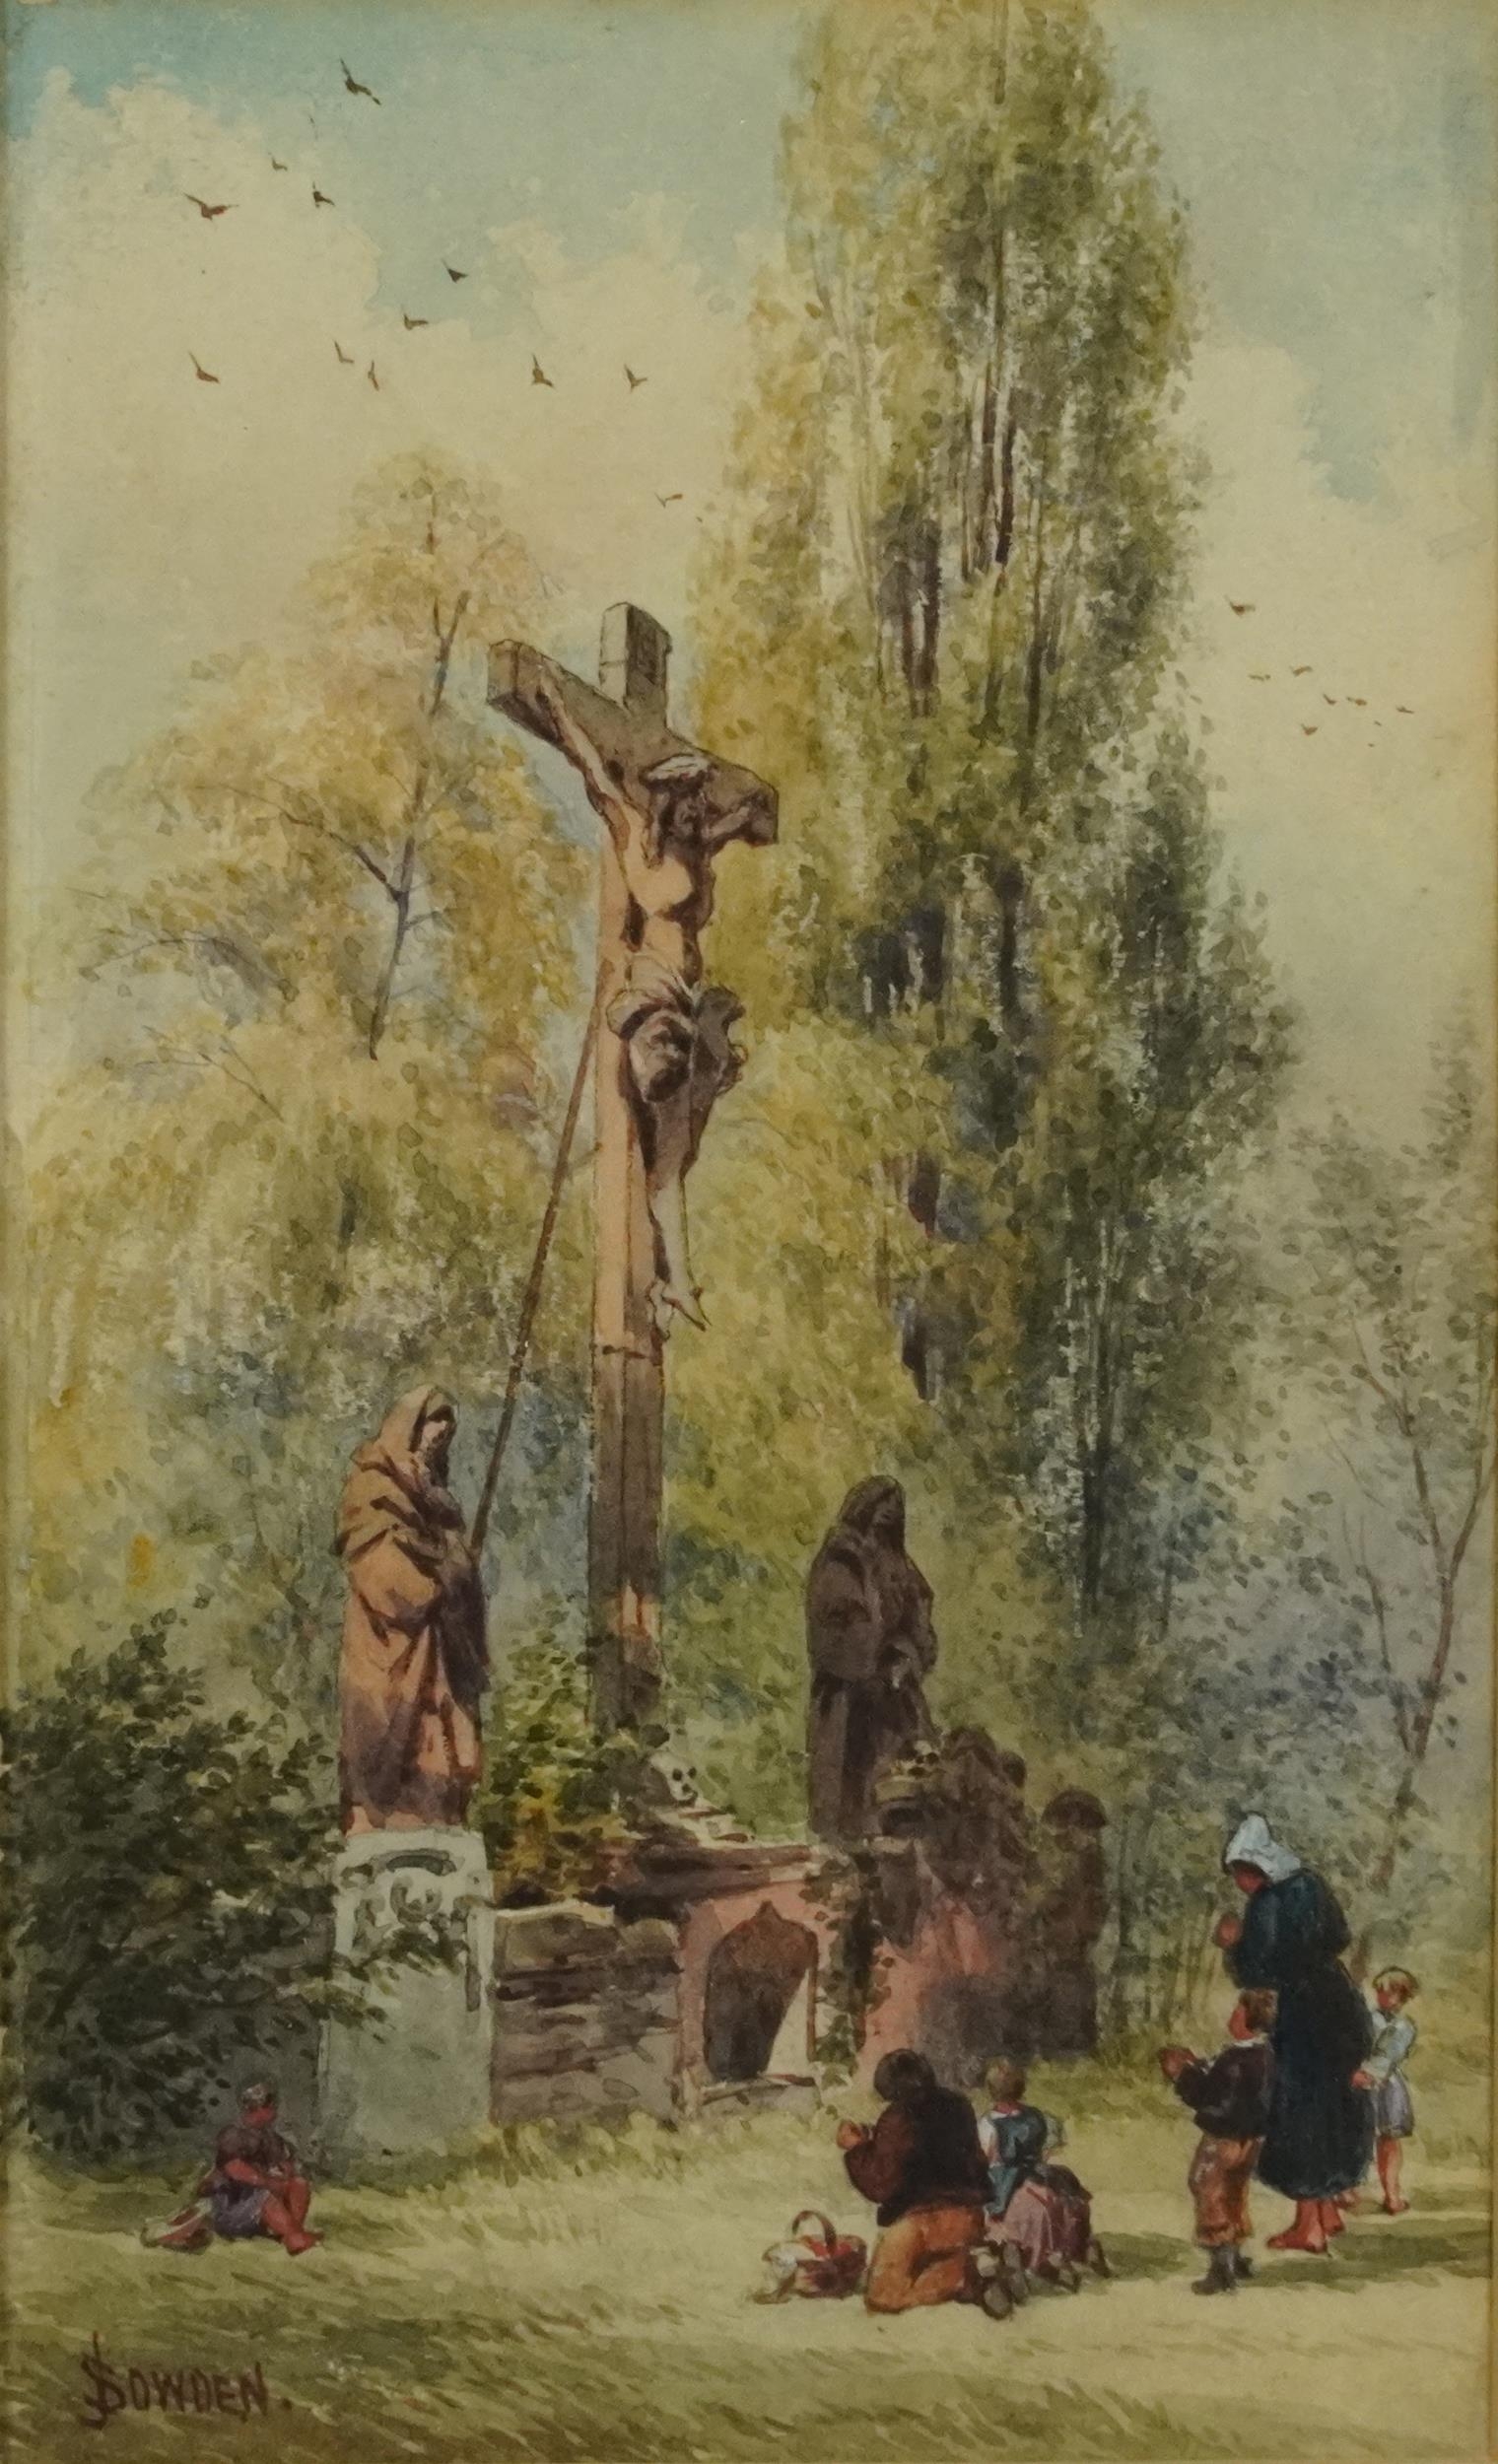 John Sowden - In the cemetery of St. Peter, Frankfurt, Germany, late 19th/early 20th century